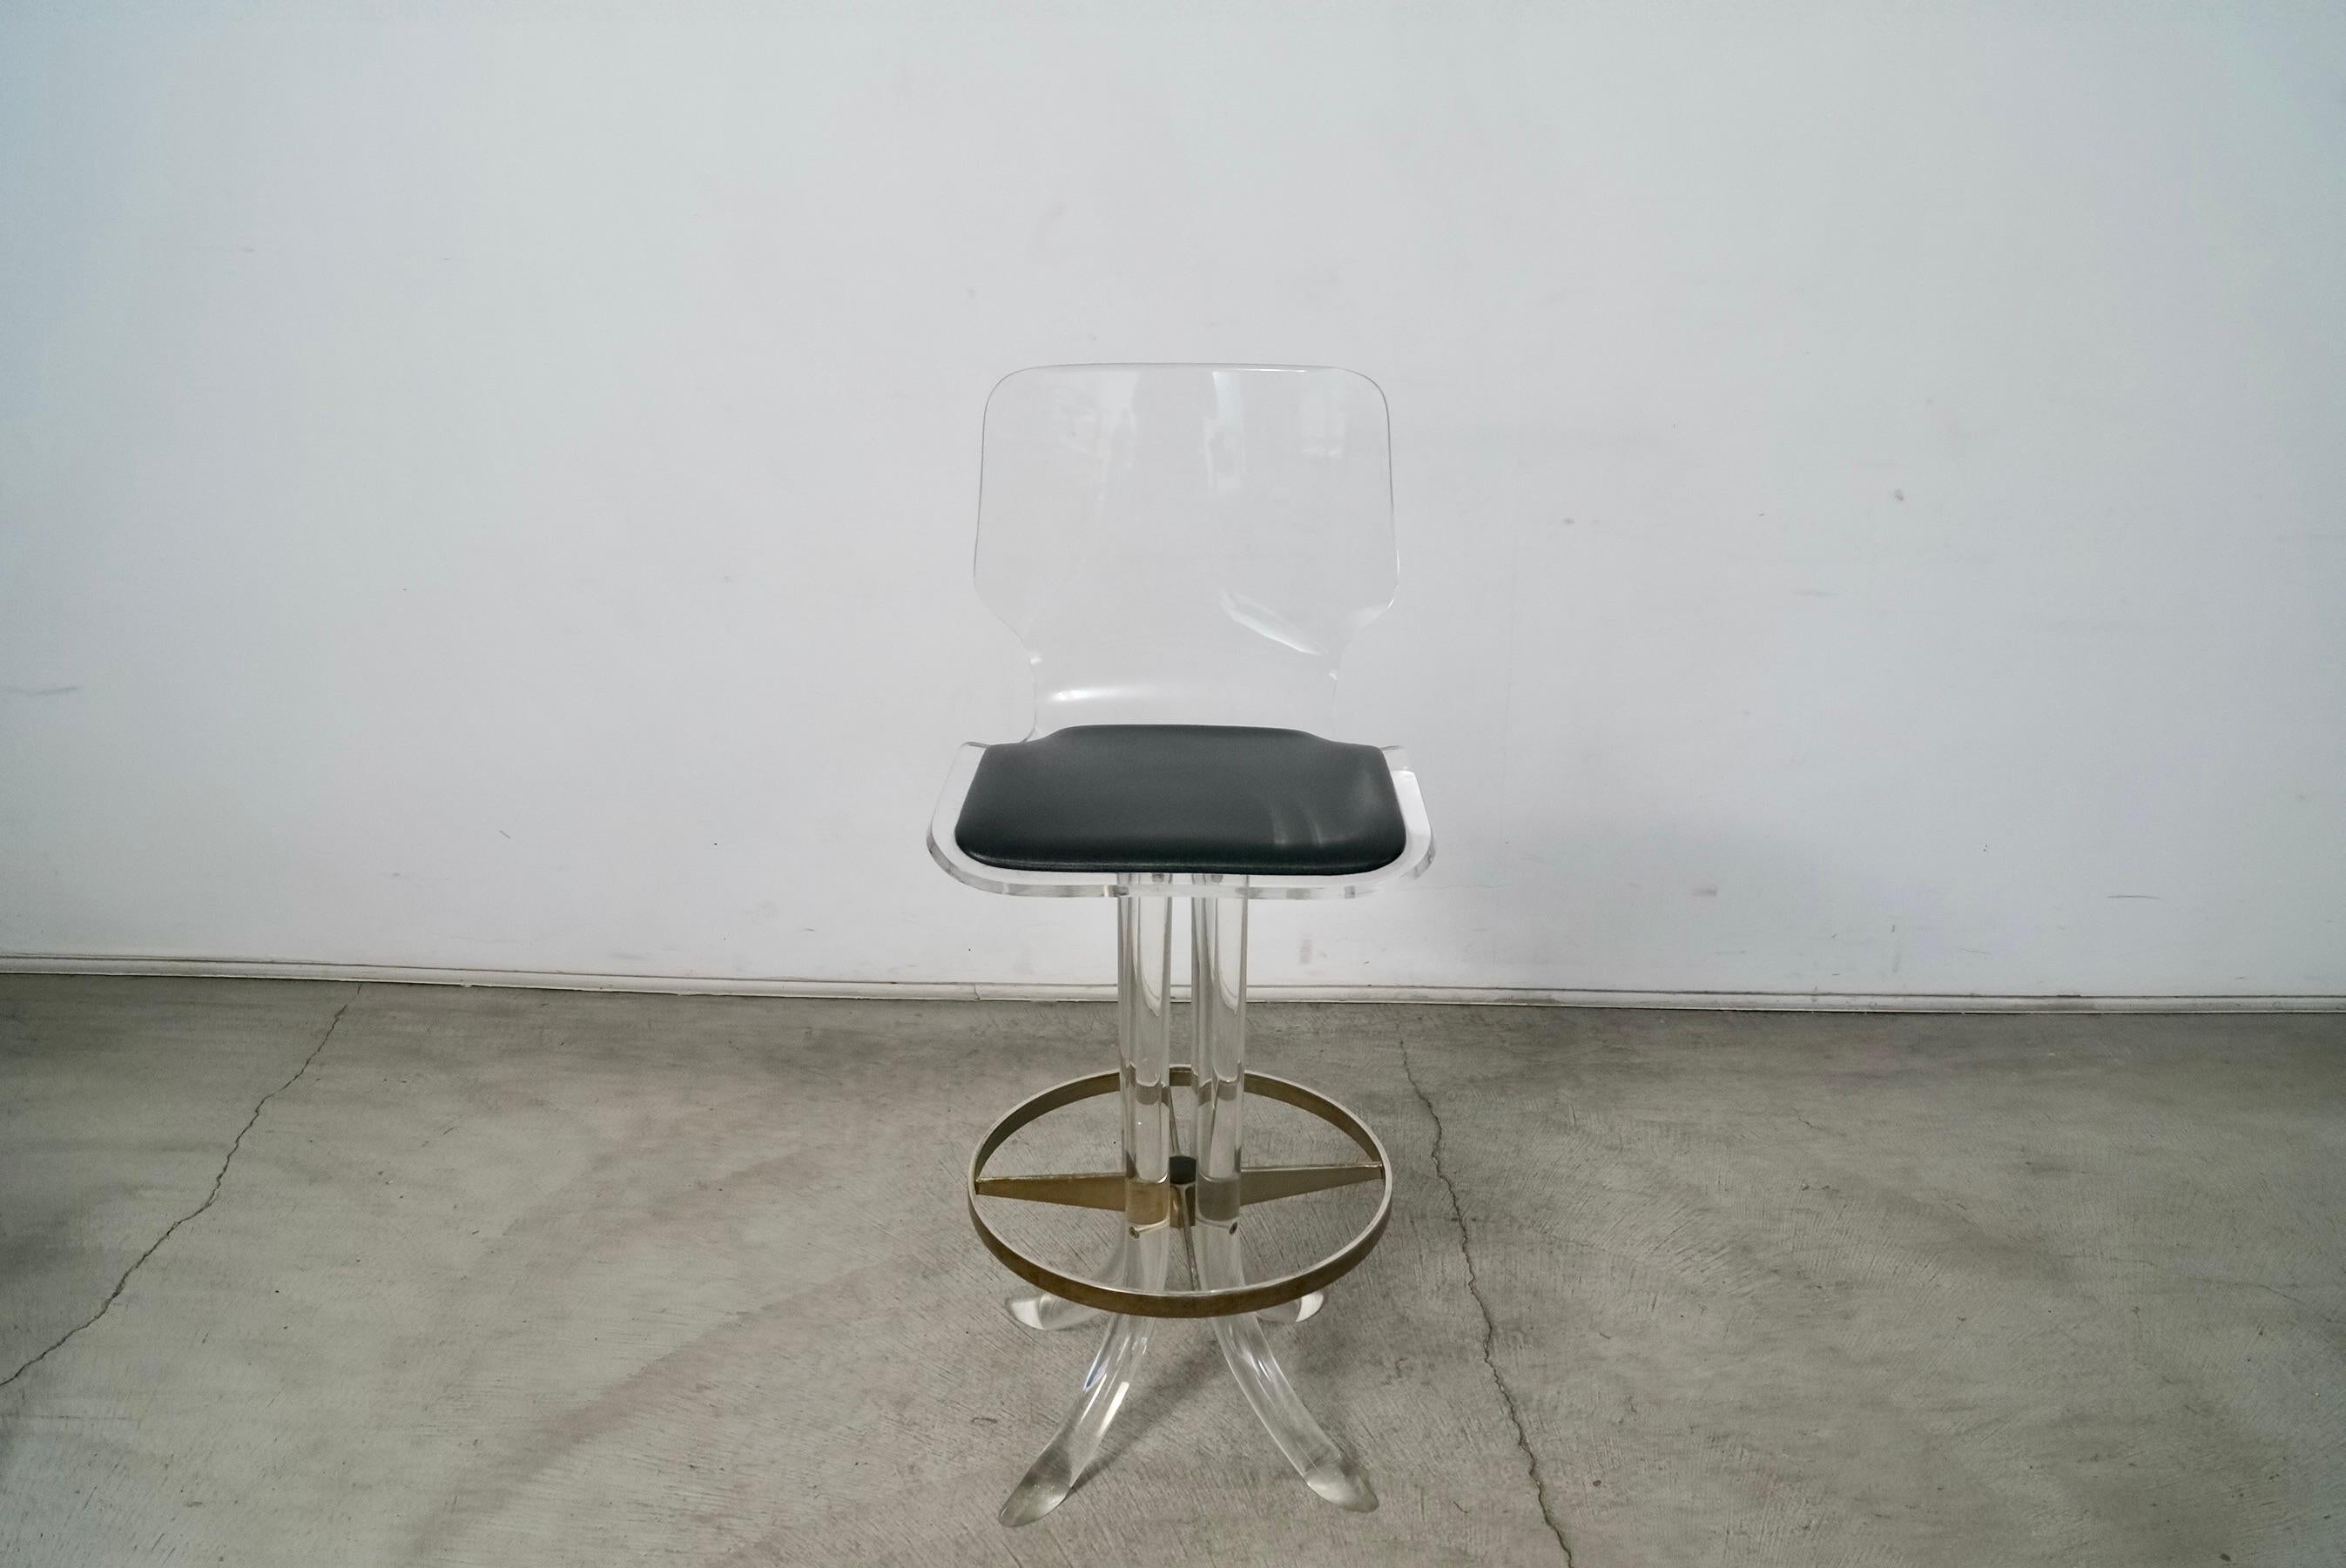 Vintage Midcentury Modern barstool for sale. Manufactured by Hill Furniture, and still has the original label attached underneath. Made of thick solid lucite with a sculptural base and four lucite flared legs. The stool swivels, and is very